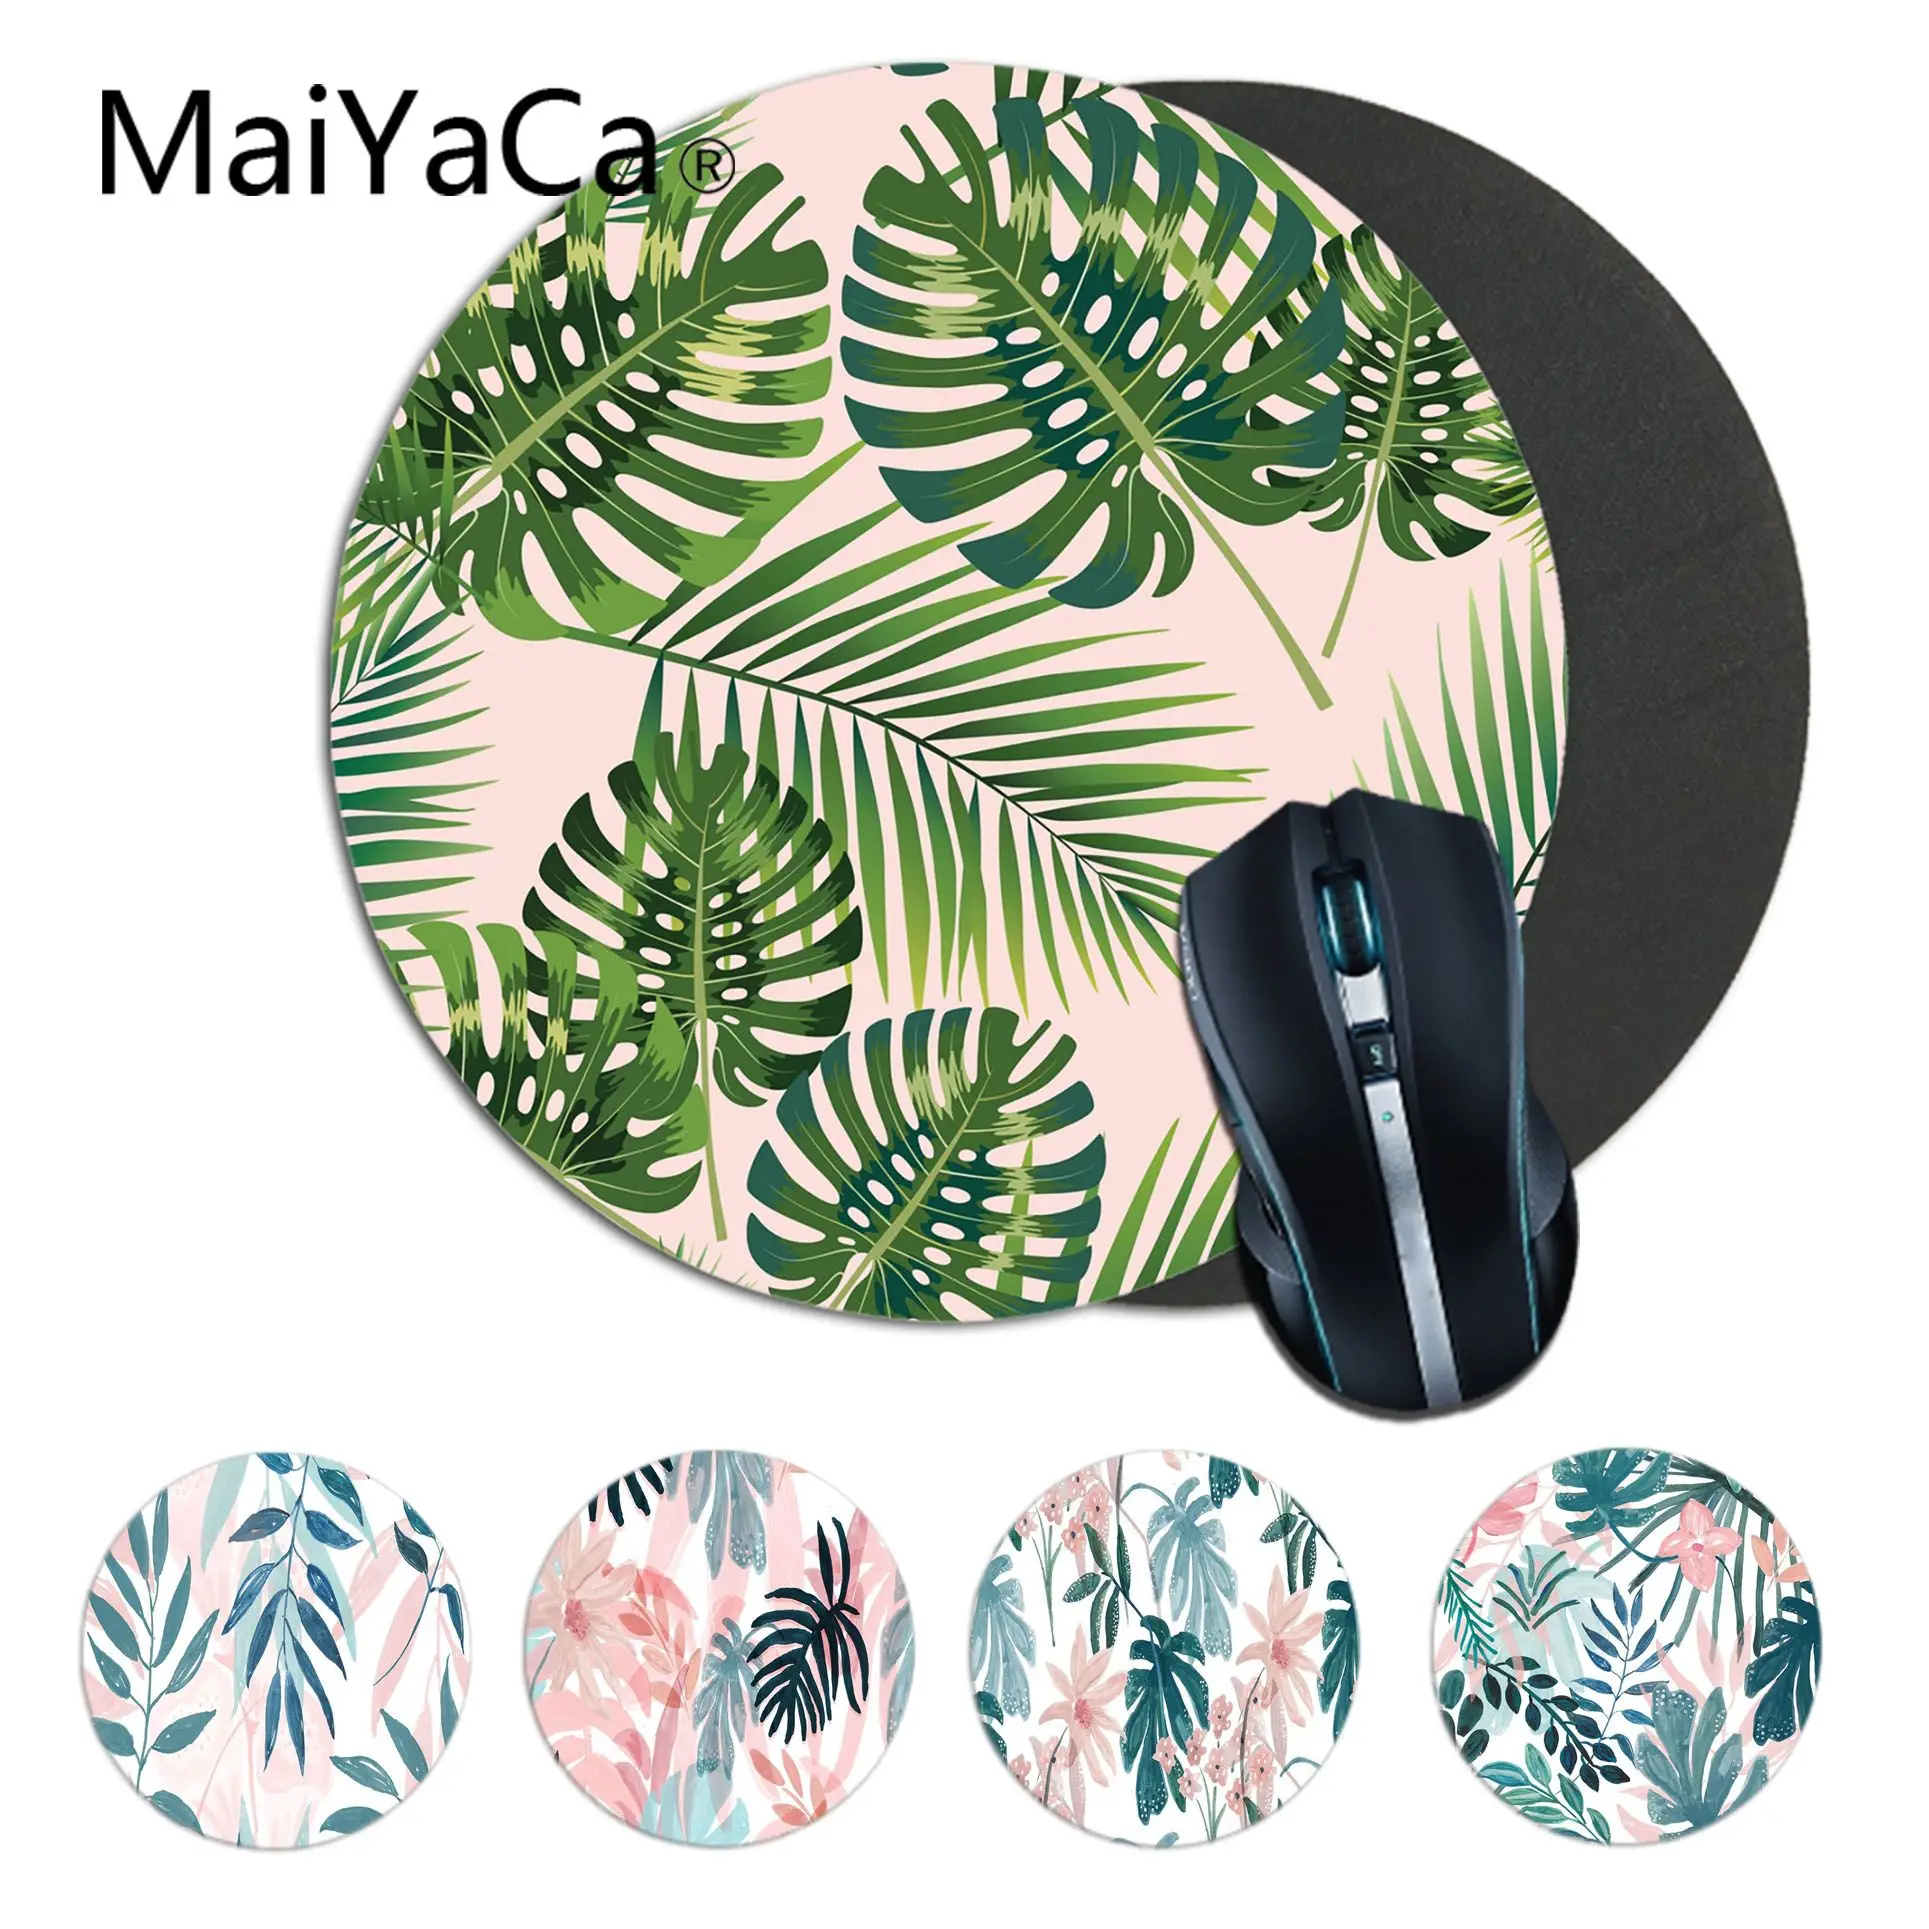 

Maiyaca Tropical leaves art pattern Office Mice Gamer Soft Round Mouse Pad Game Carpet Mouse Pad Mat gaming Mousepad 22x22cm